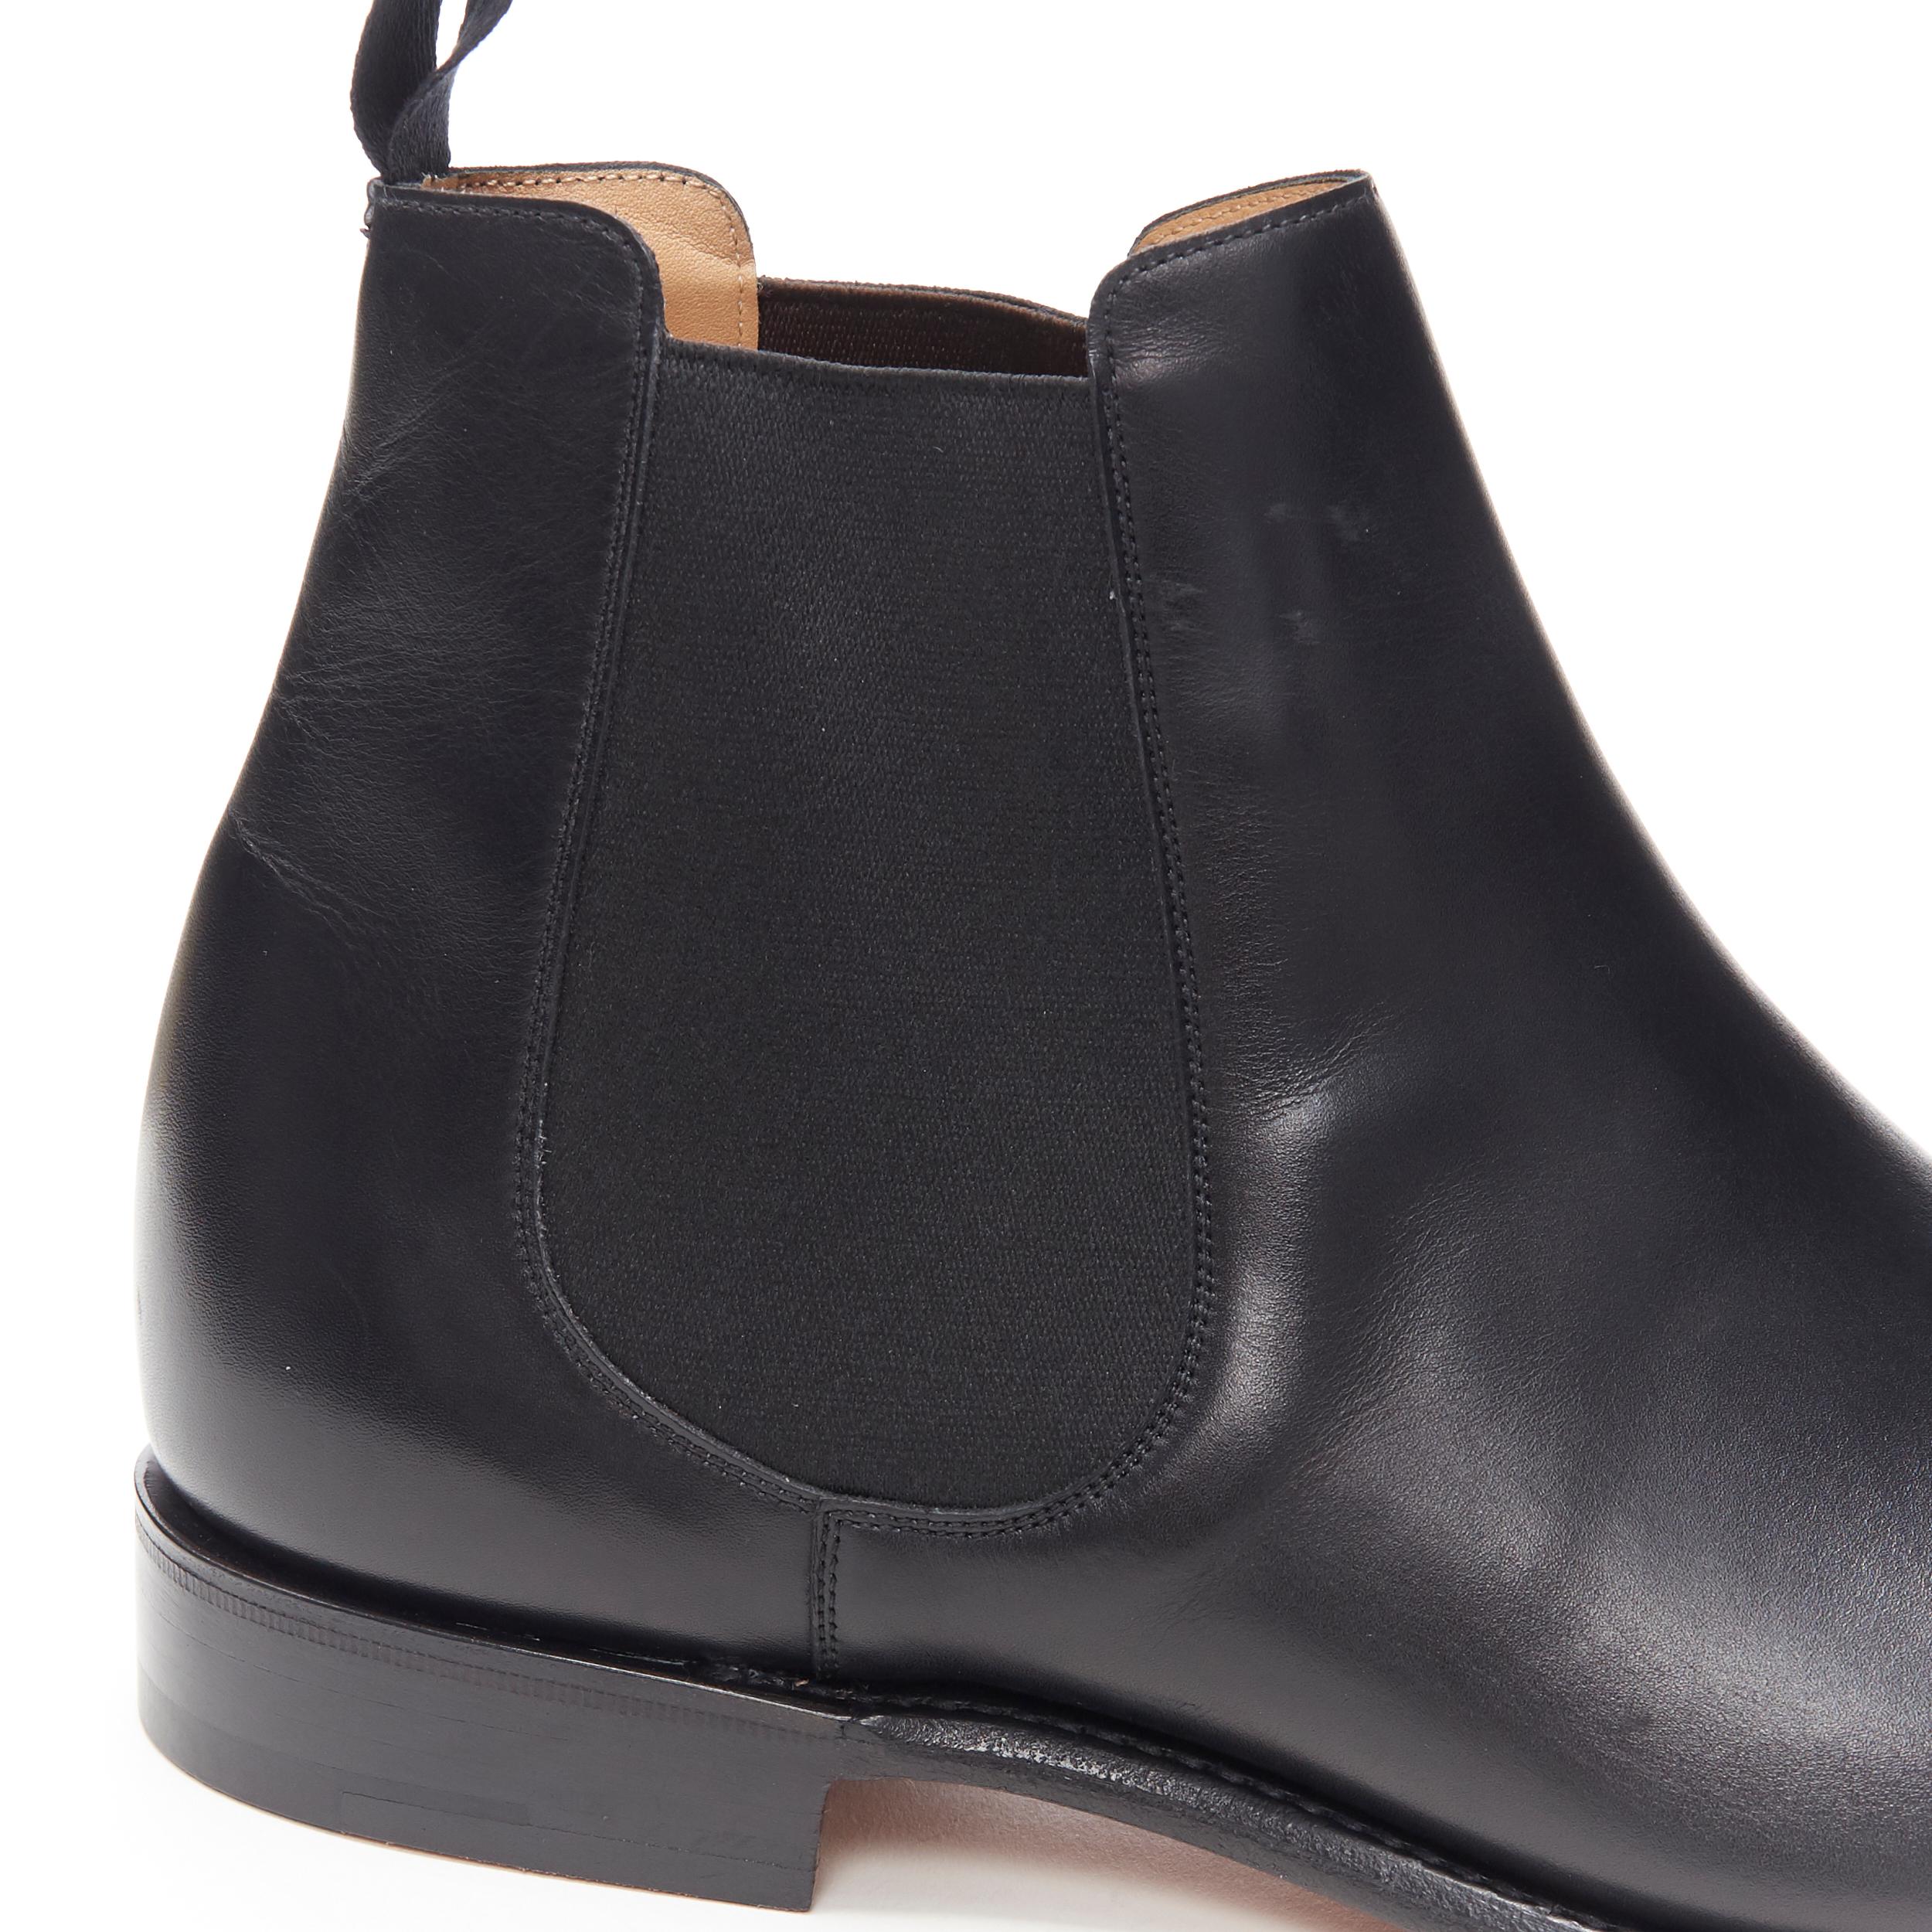 new CHURCH'S Ryehill 450 black calf leather round chelsea ankle boots UK10 EU44 2